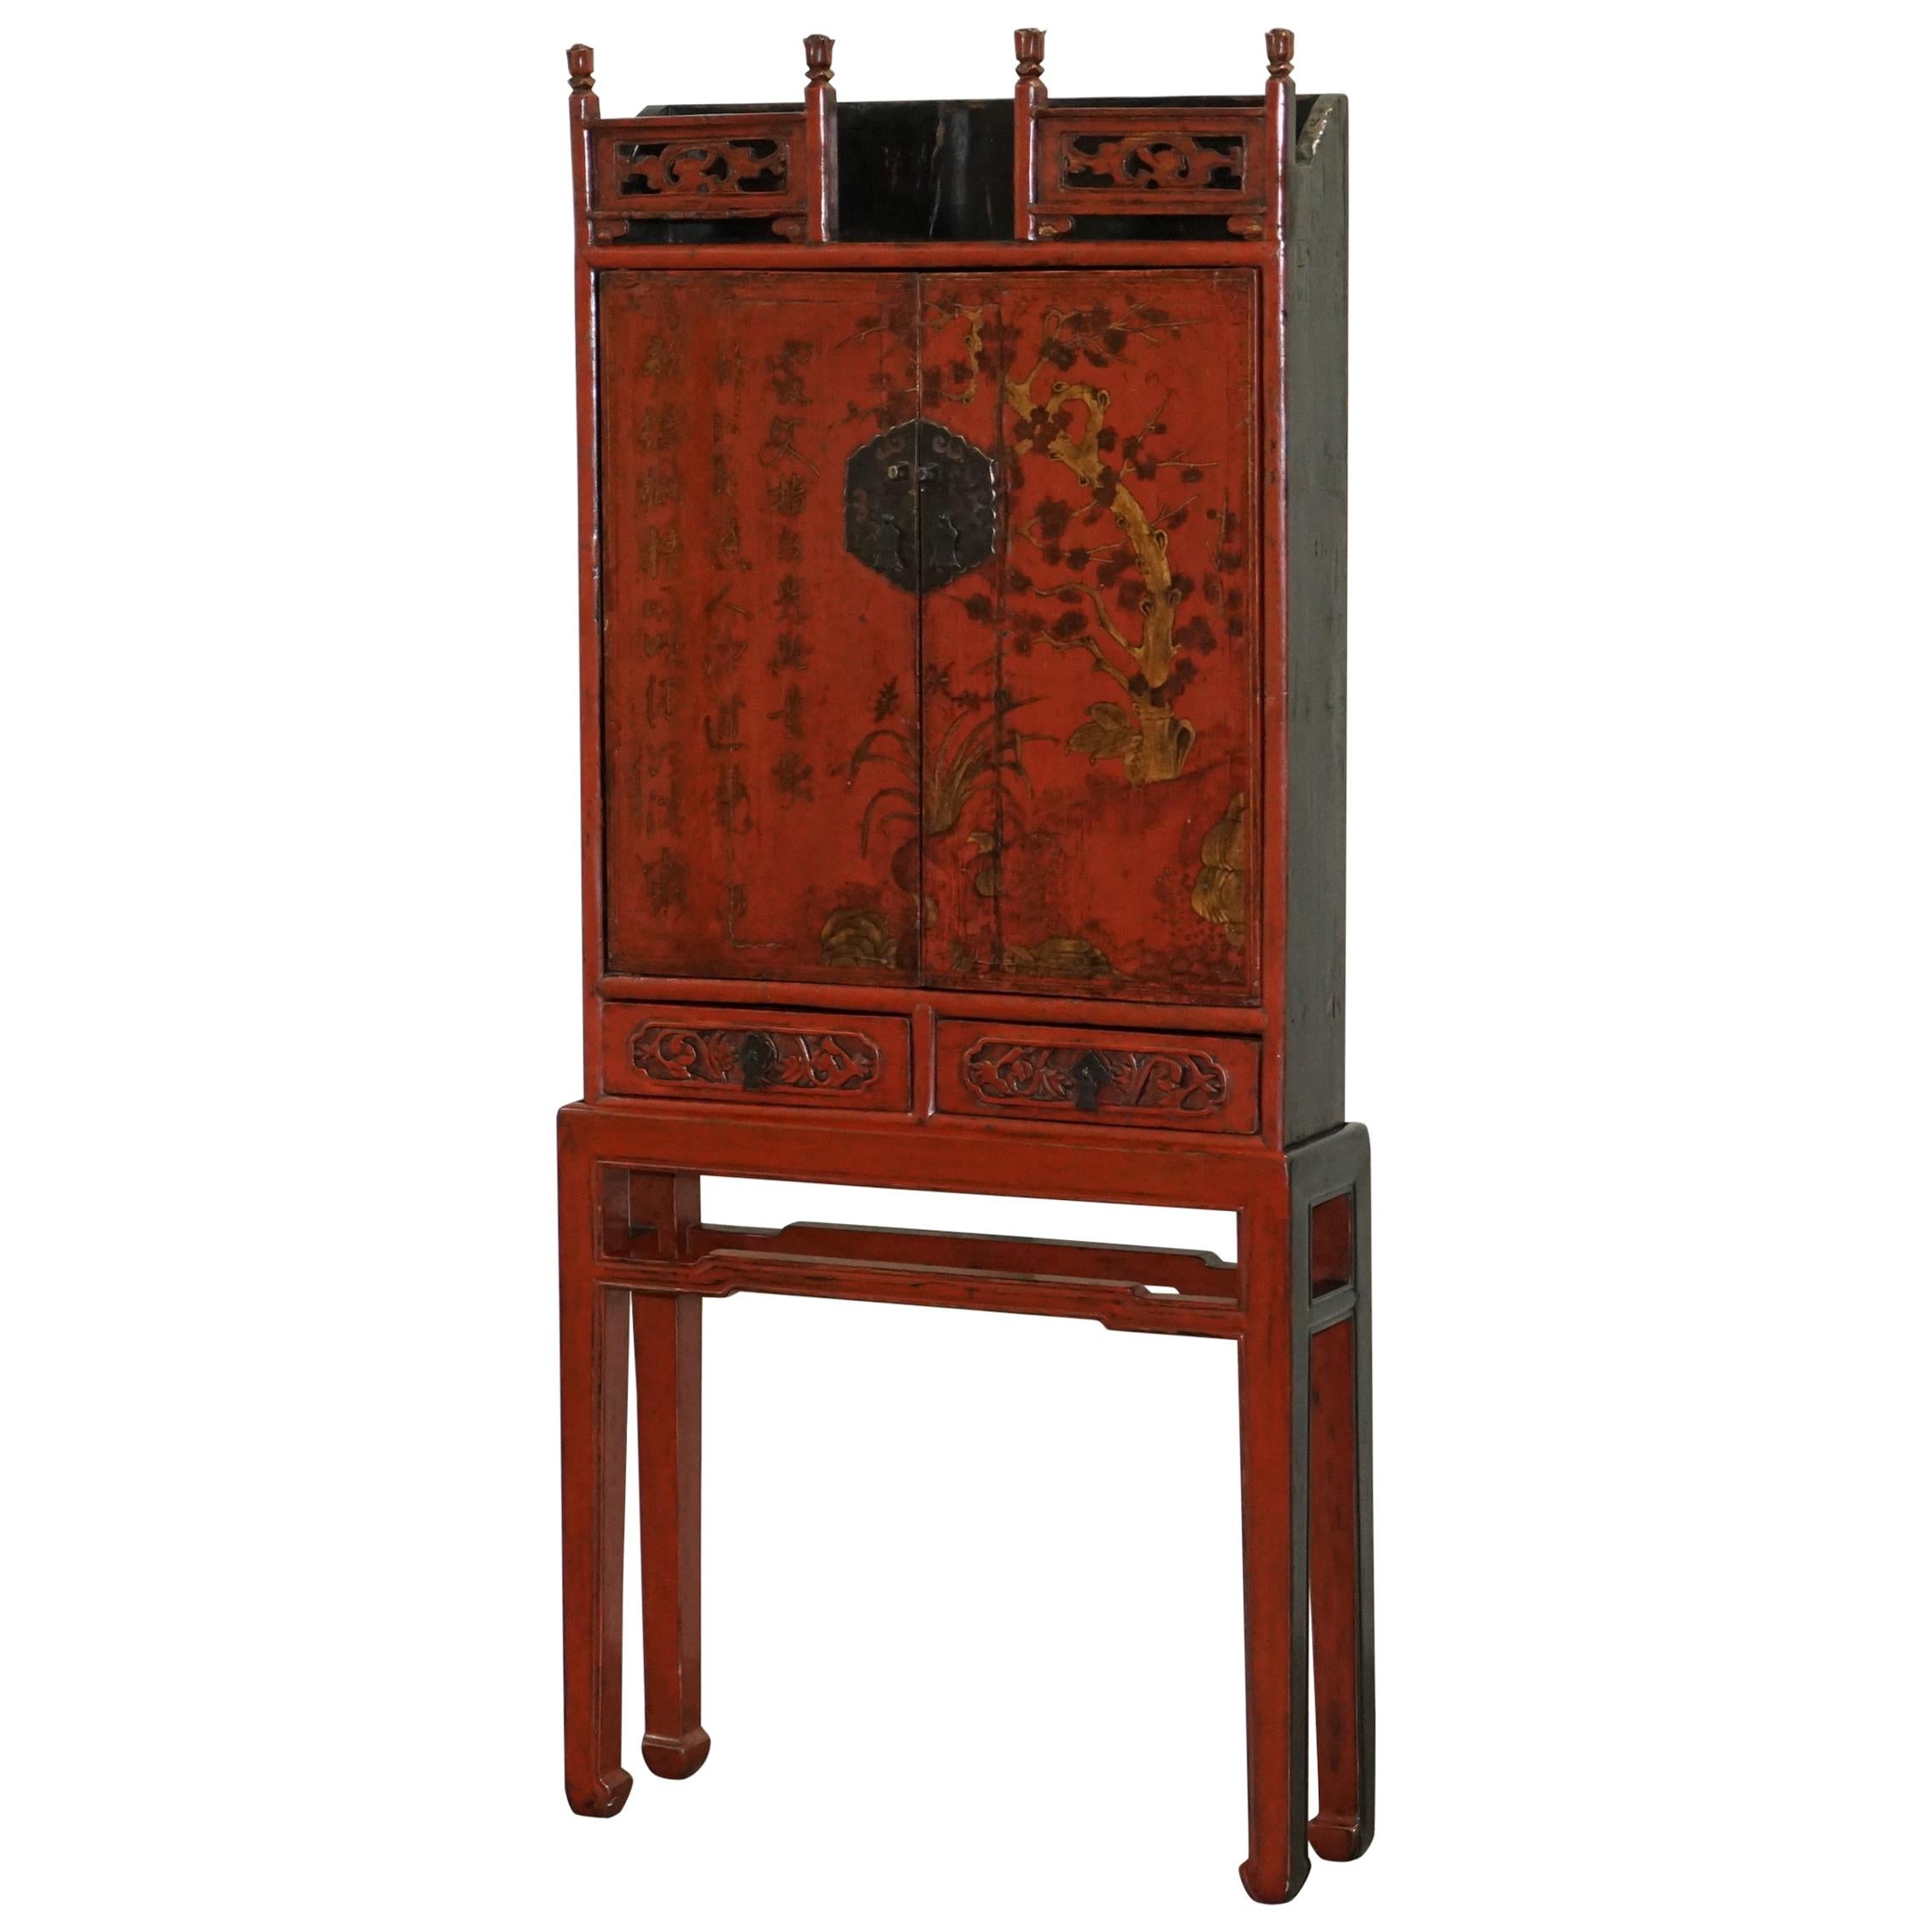 antique-japanese-marquetry-and-lacquer-cabinet-on-stand-at-1stdibs